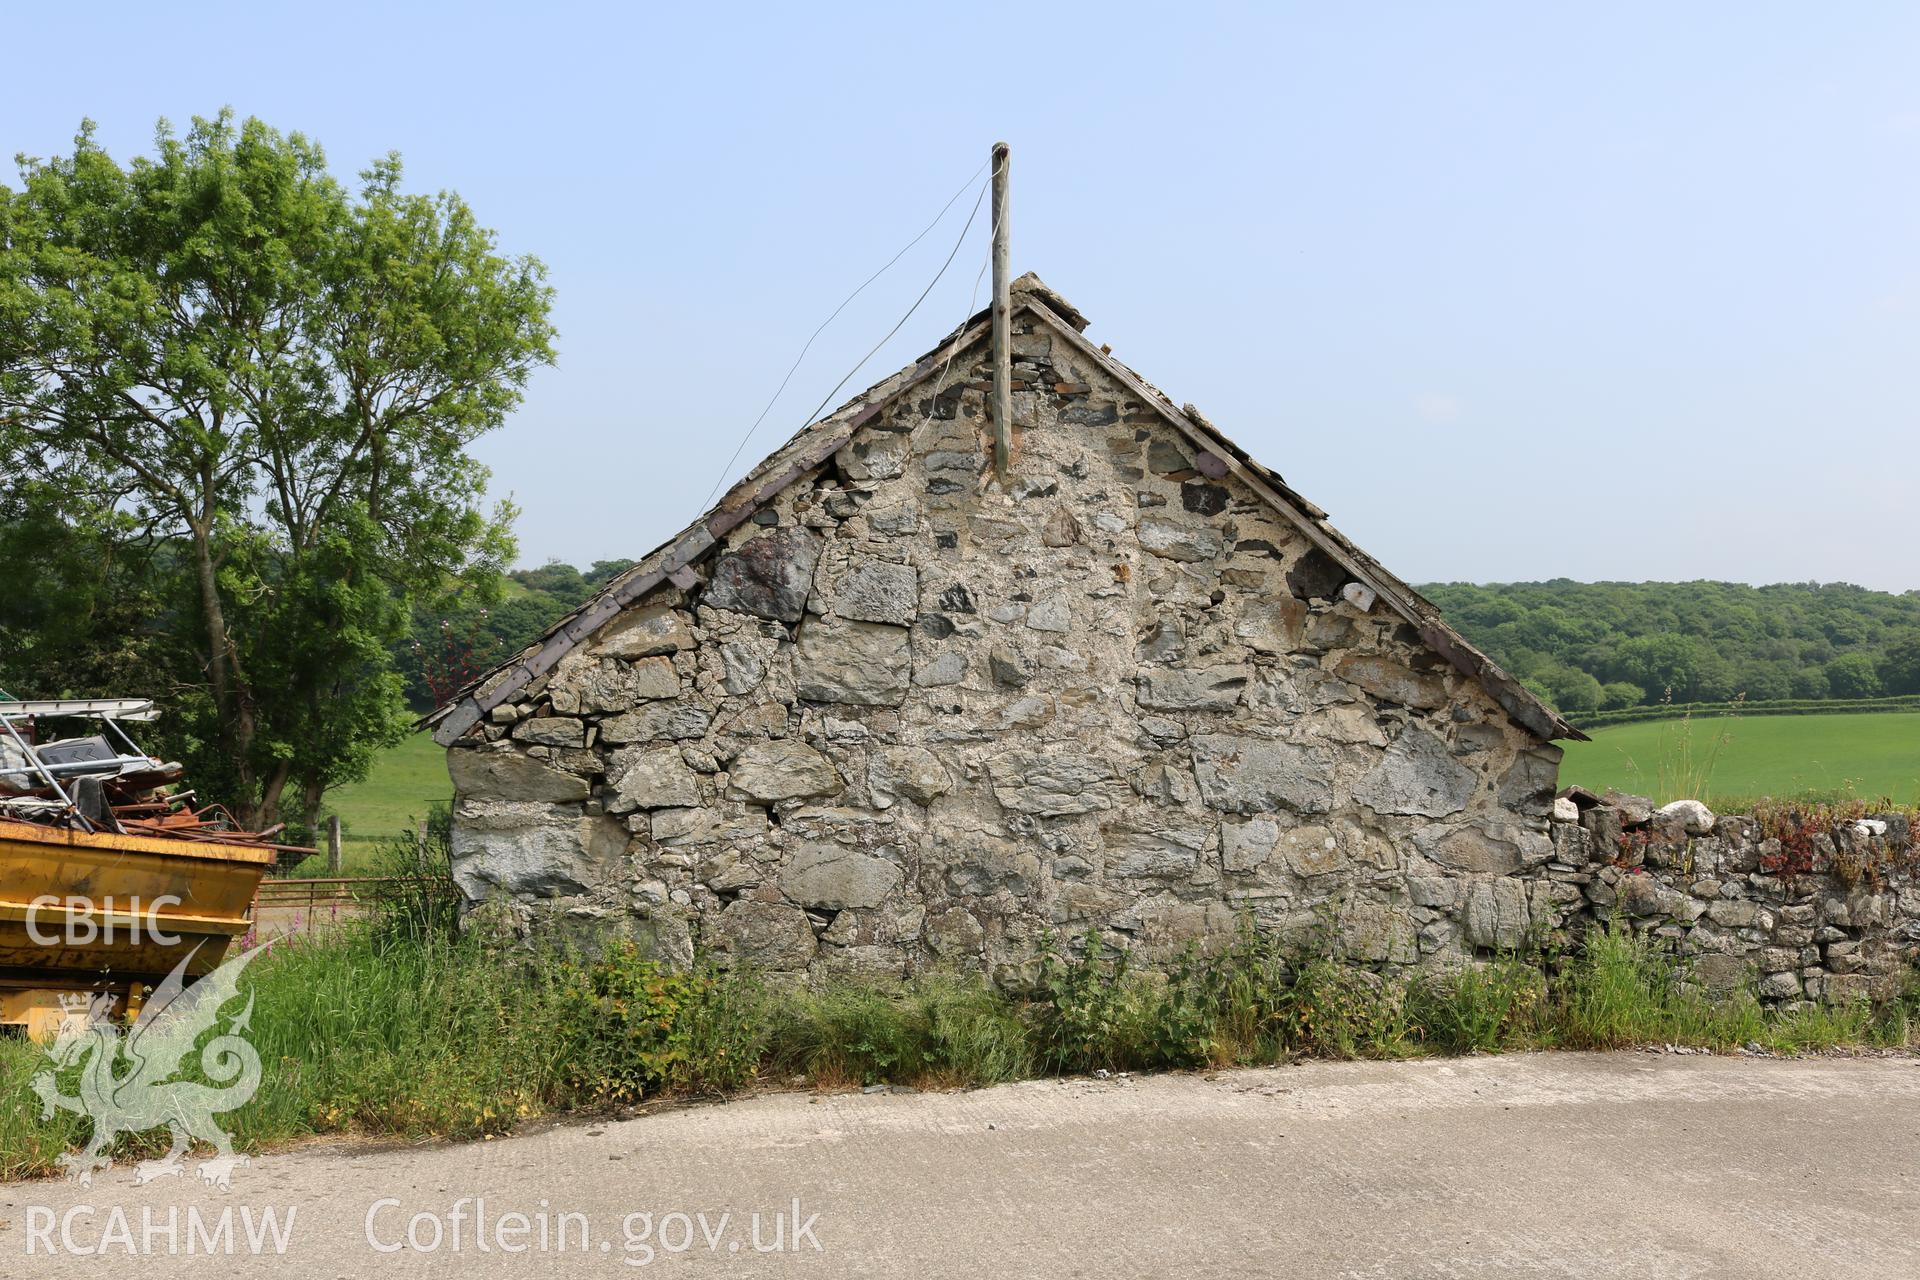 Photograph showing exterior view of dairy, at Maes yr Hendre, taken by Dr Marian Gwyn, 6th July 2016. (Original Reference no. 0297)